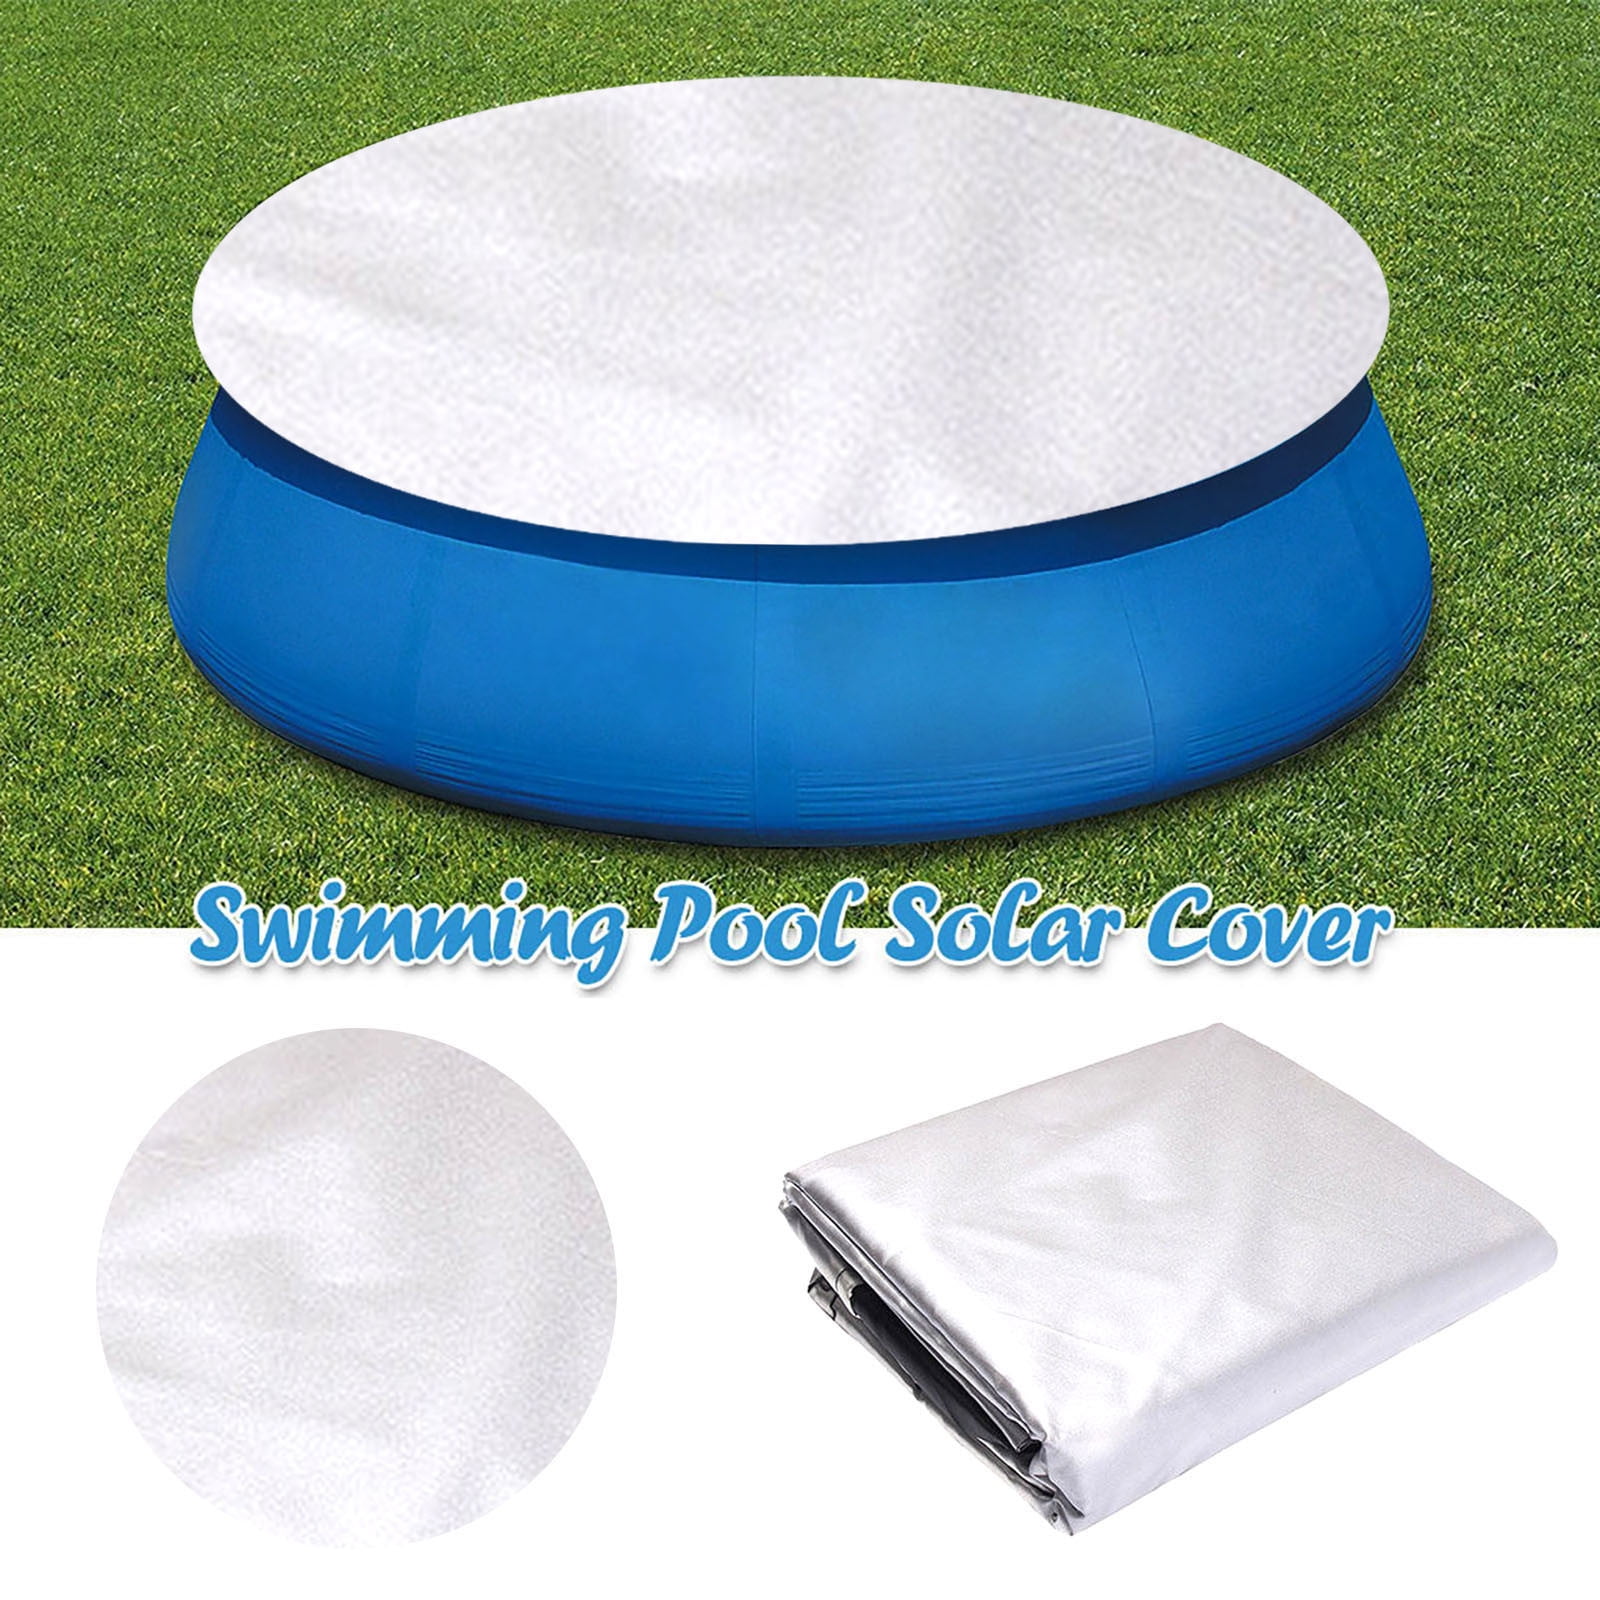 Swimming Pool Blue Solar Cover Summer Pool Cover Foot Above Ground Protector Kit